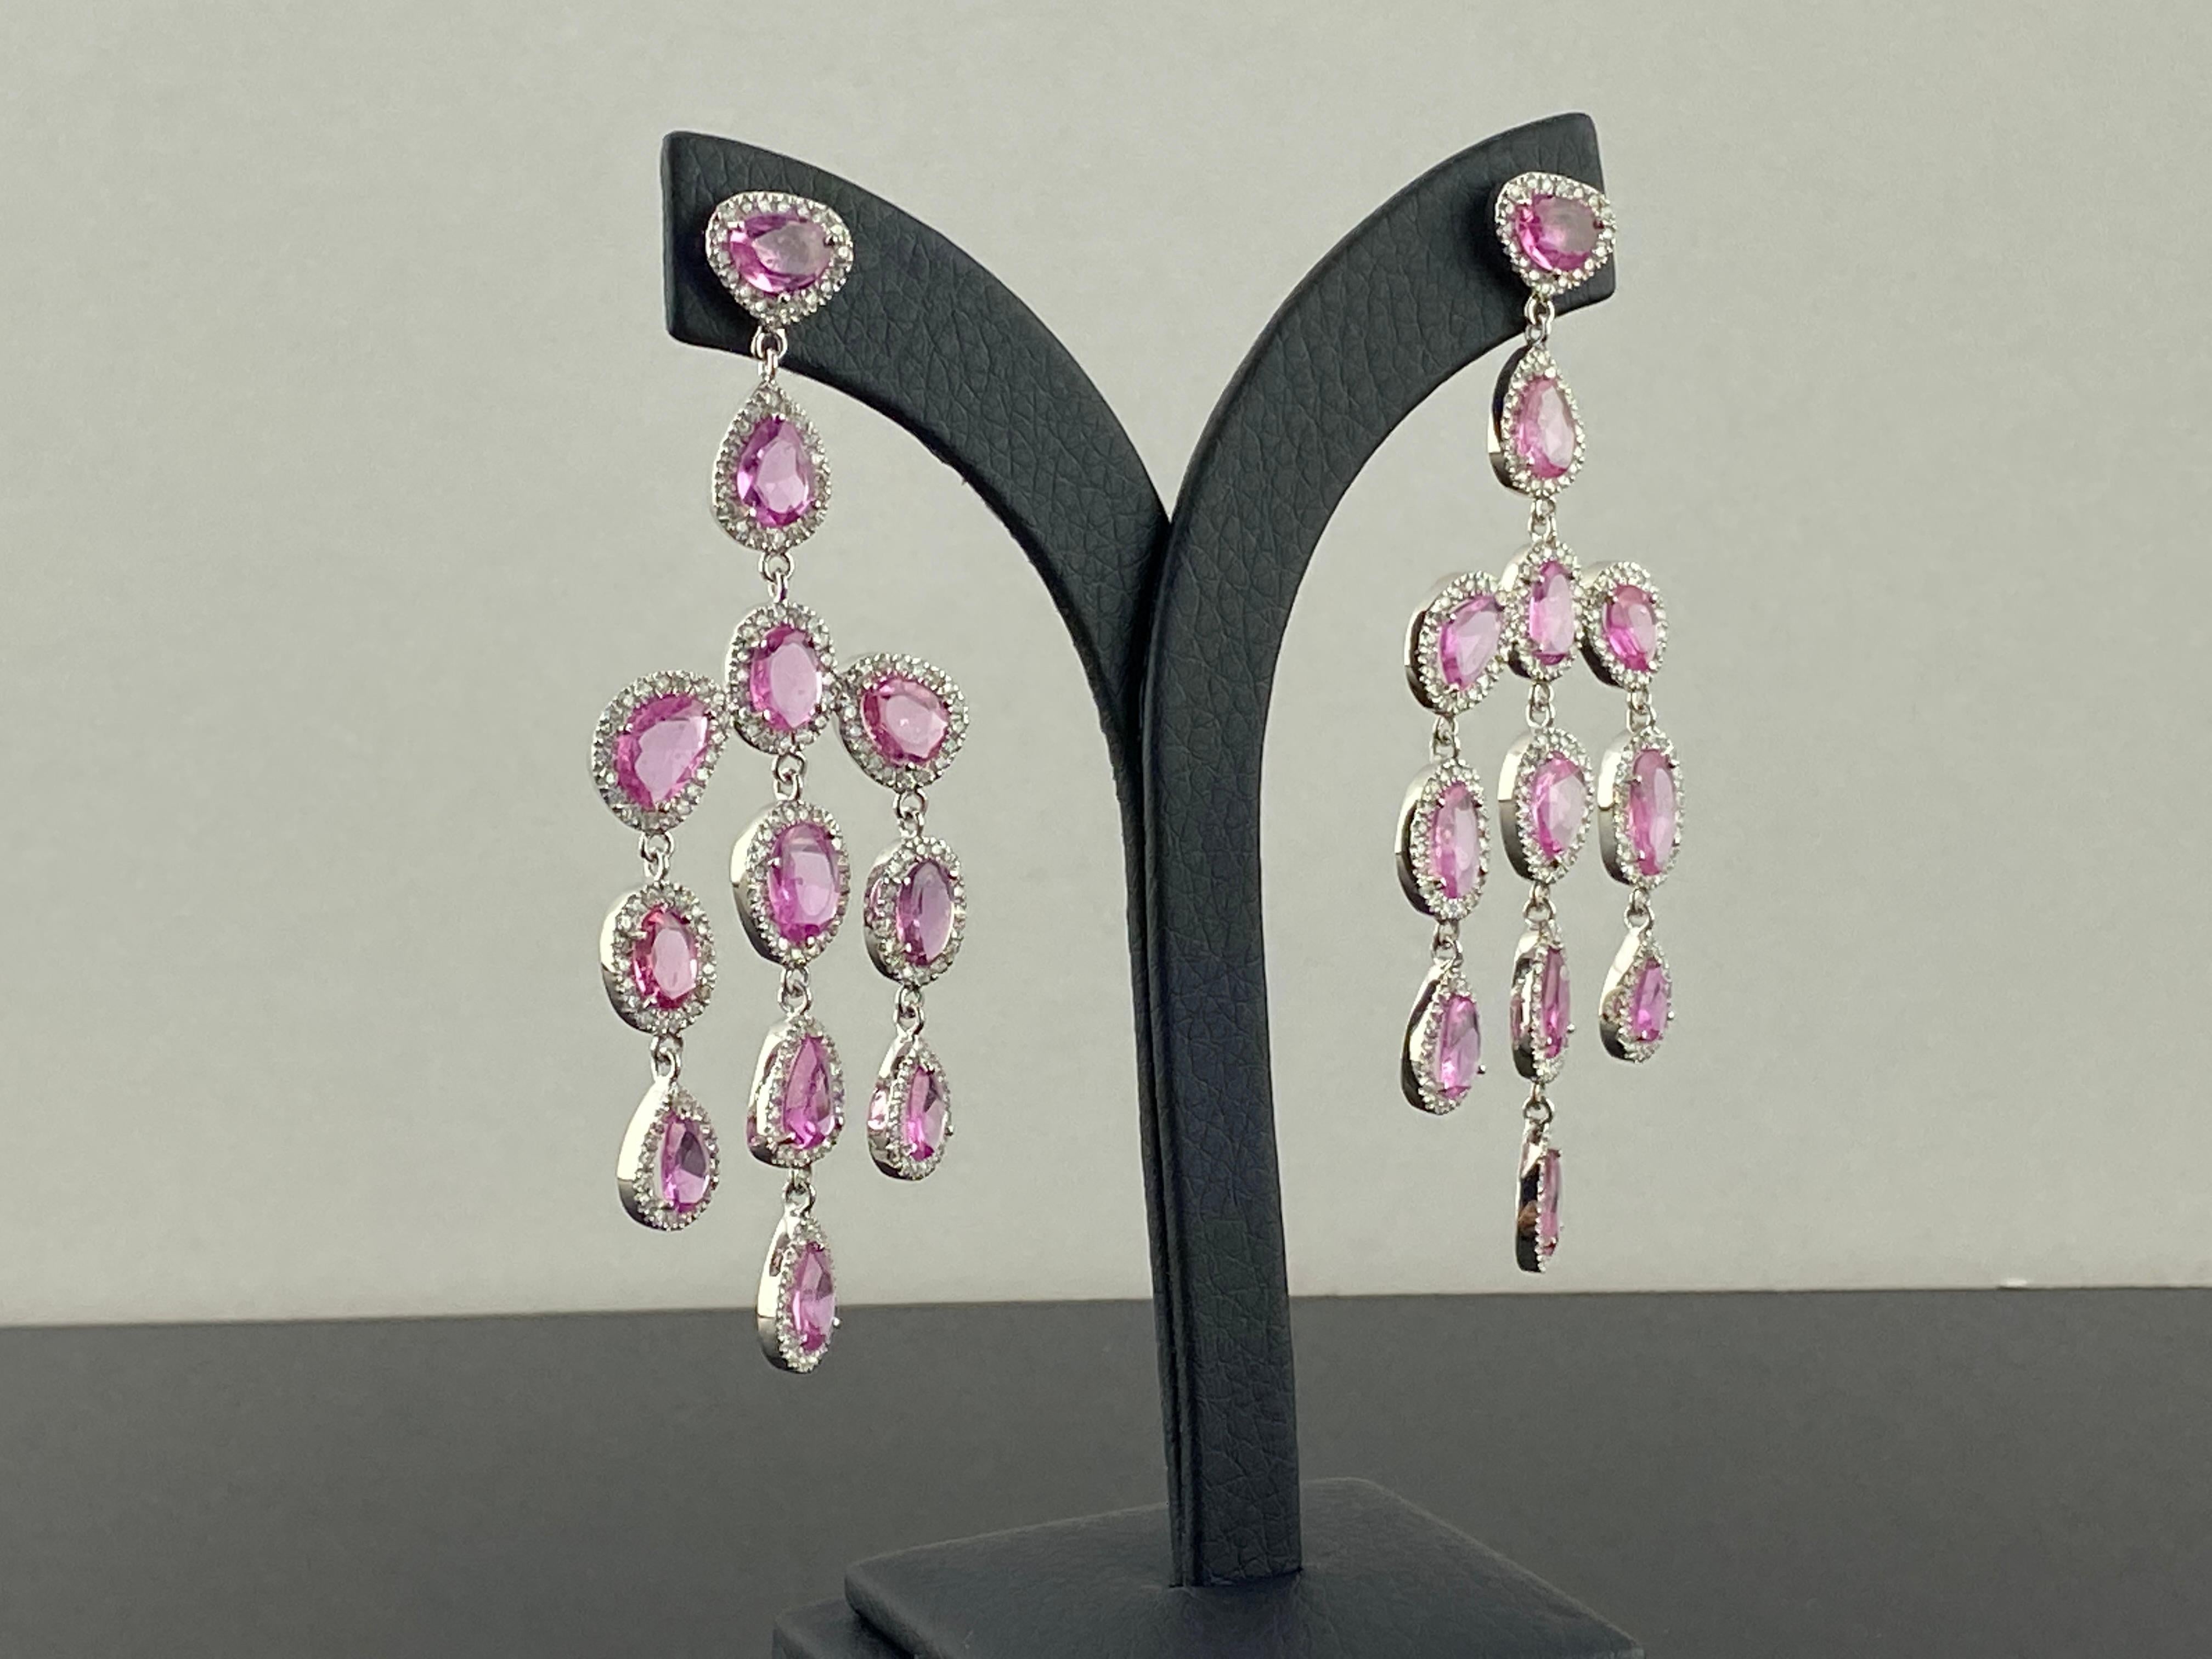 A stunning pair of 16.61 carat rose-cut Pink Sapphire and Diamond dangle earrings, set in 18K White Gold. The earrings are light weight, at around 17 grams in total, and is 3 inches long. The Sapphires have an ideal pink color, and great clarity.